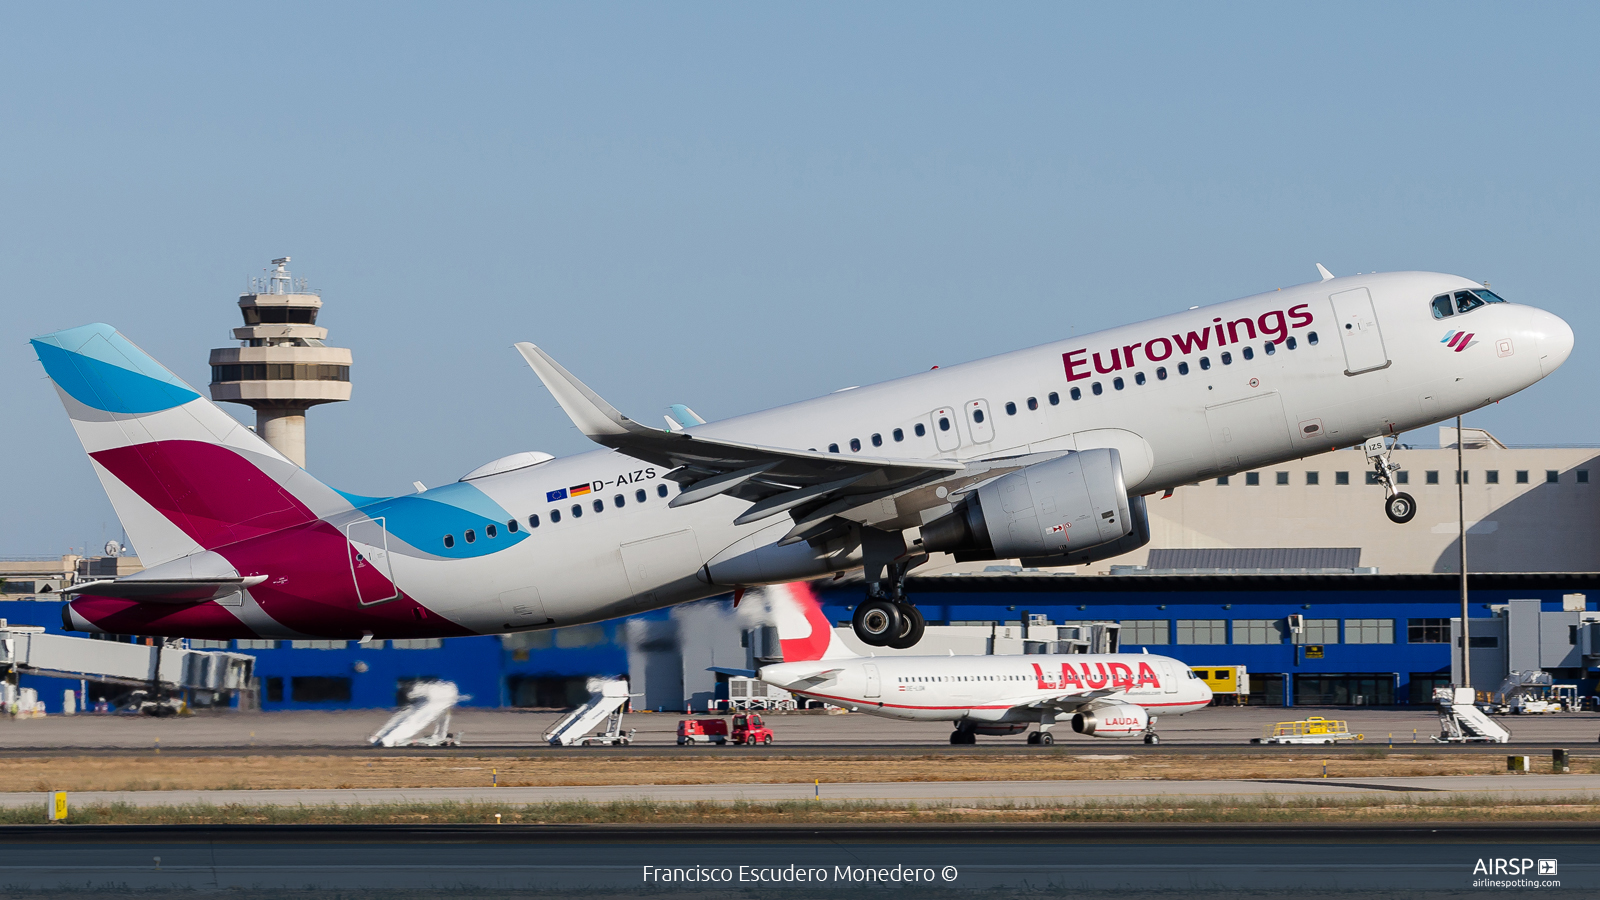 Eurowings  Airbus A320  D-AIZS